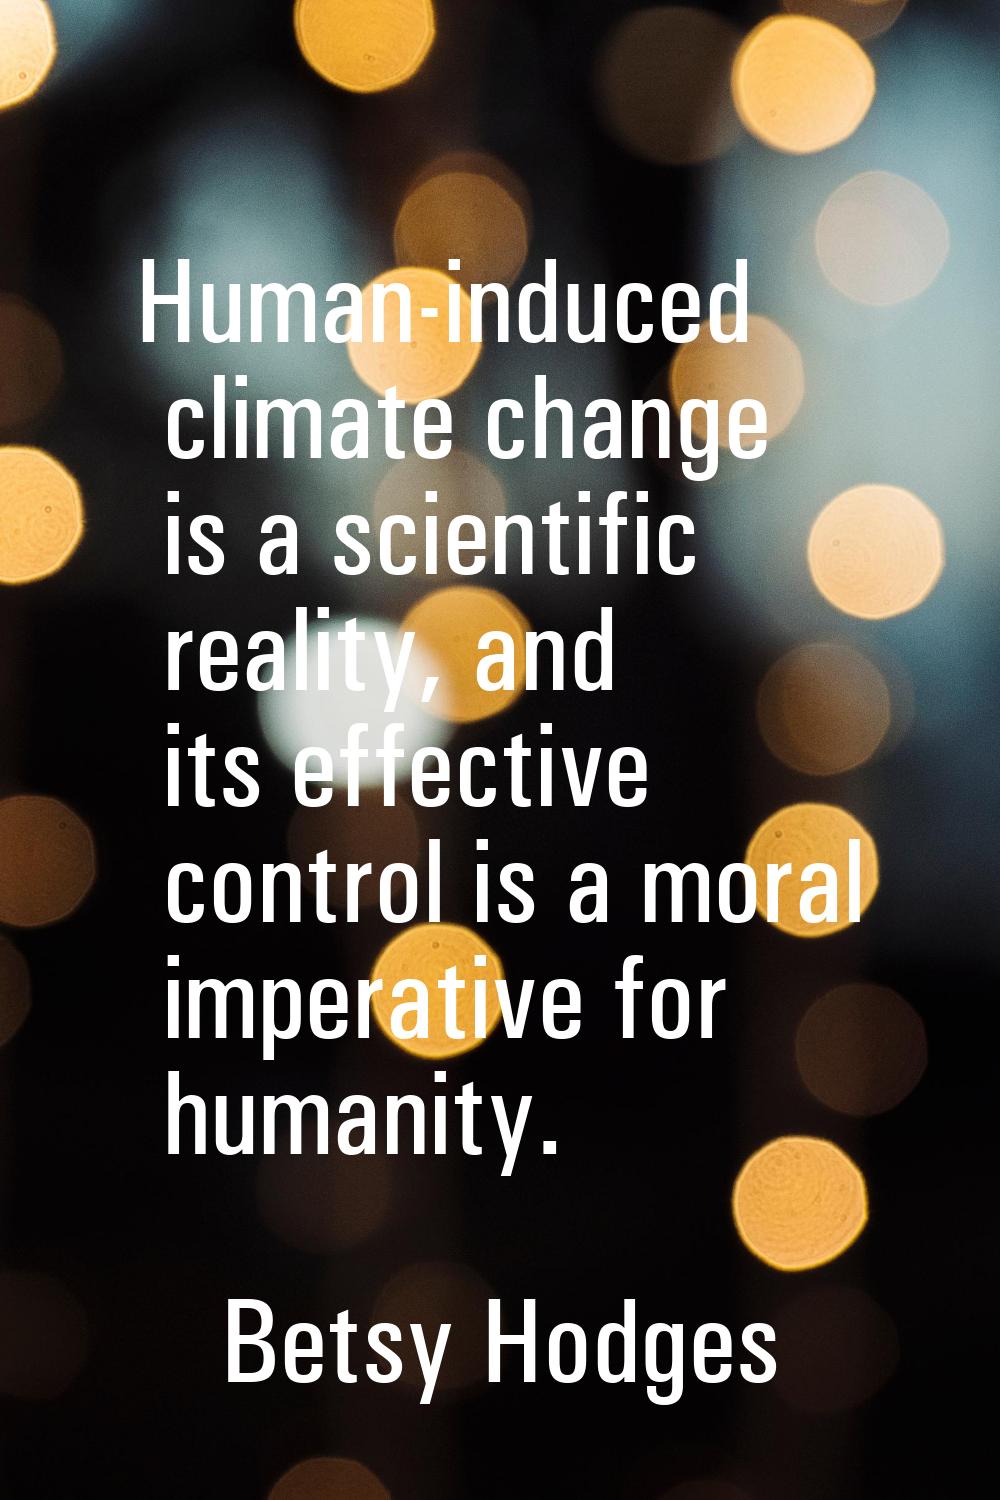 Human-induced climate change is a scientific reality, and its effective control is a moral imperati